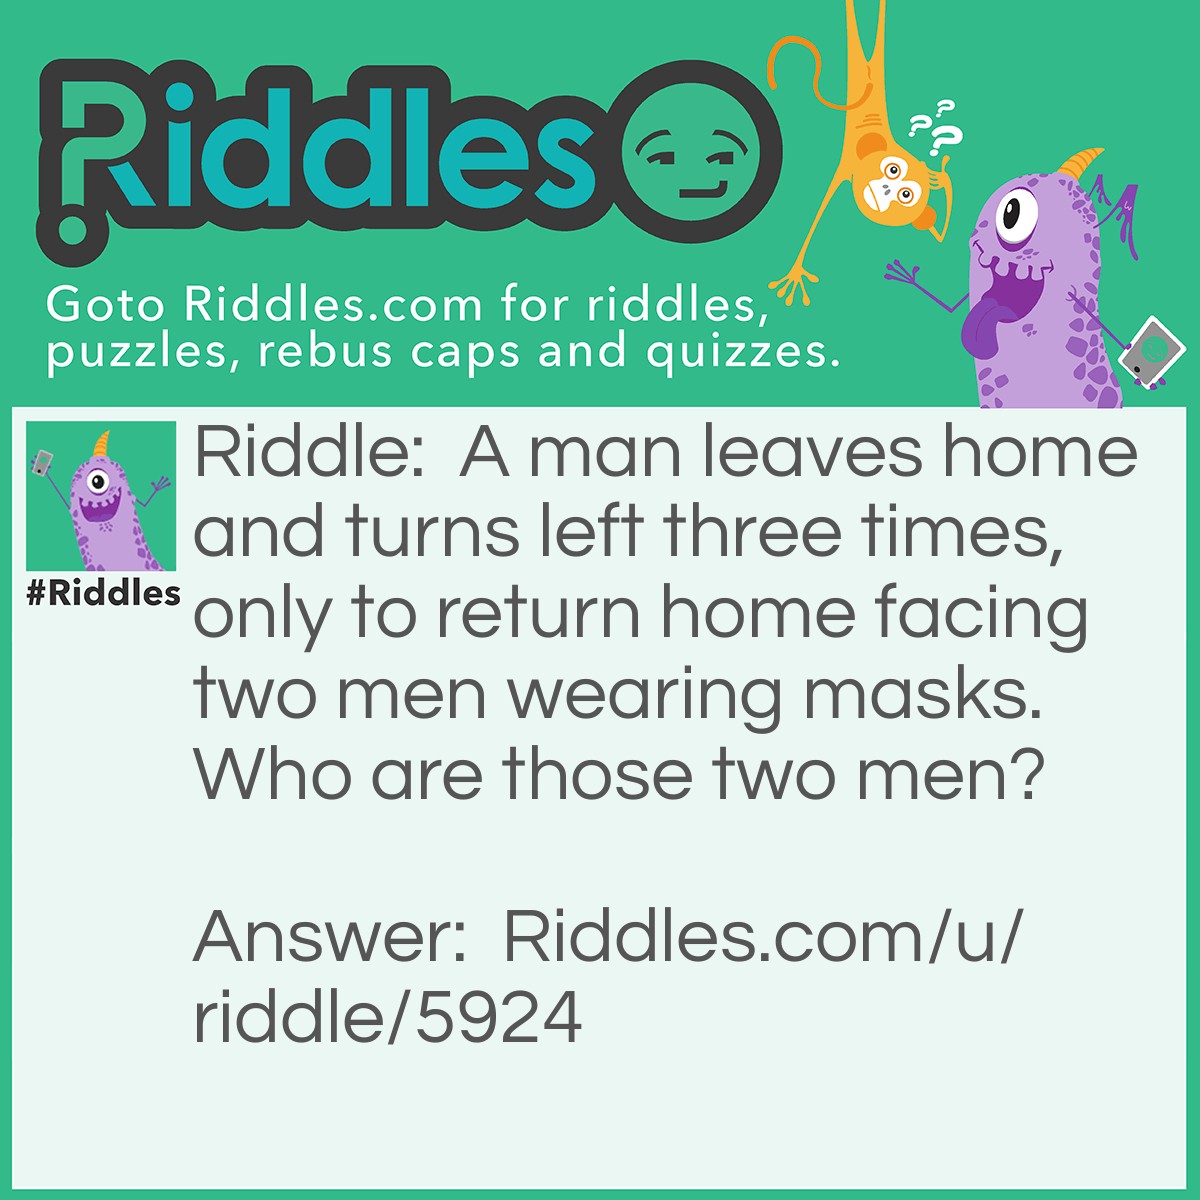 Riddle: A man leaves home and turns left three times, only to return home facing two men wearing masks. Who are those two men? Answer: The catcher and the umpire.